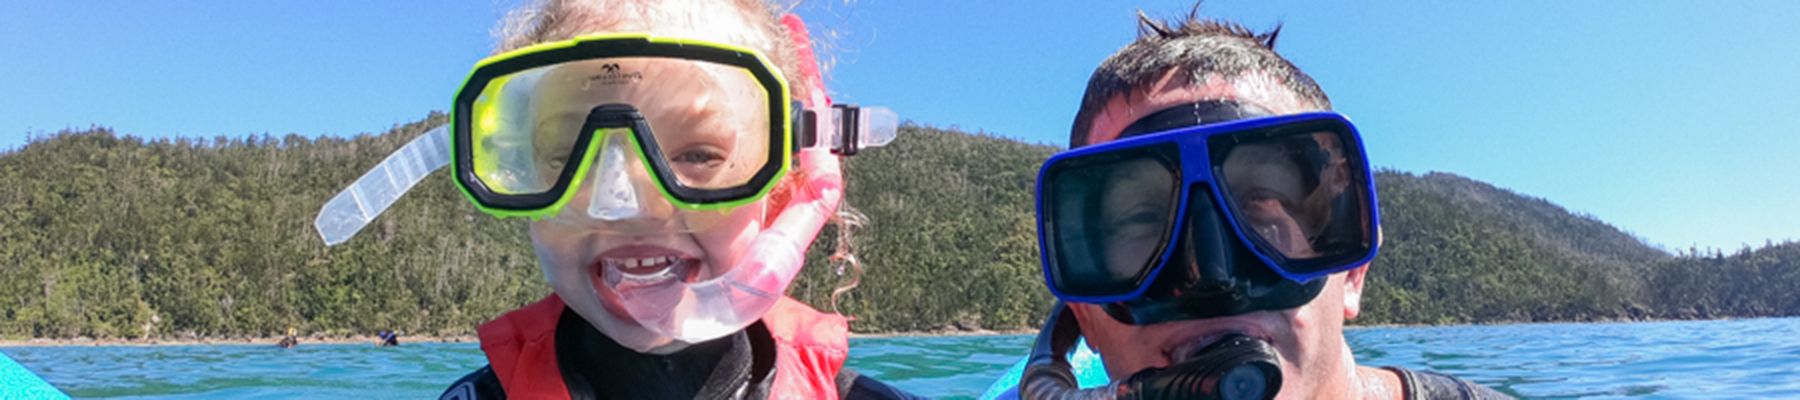 Father and daughter with snorkel gear on in the water